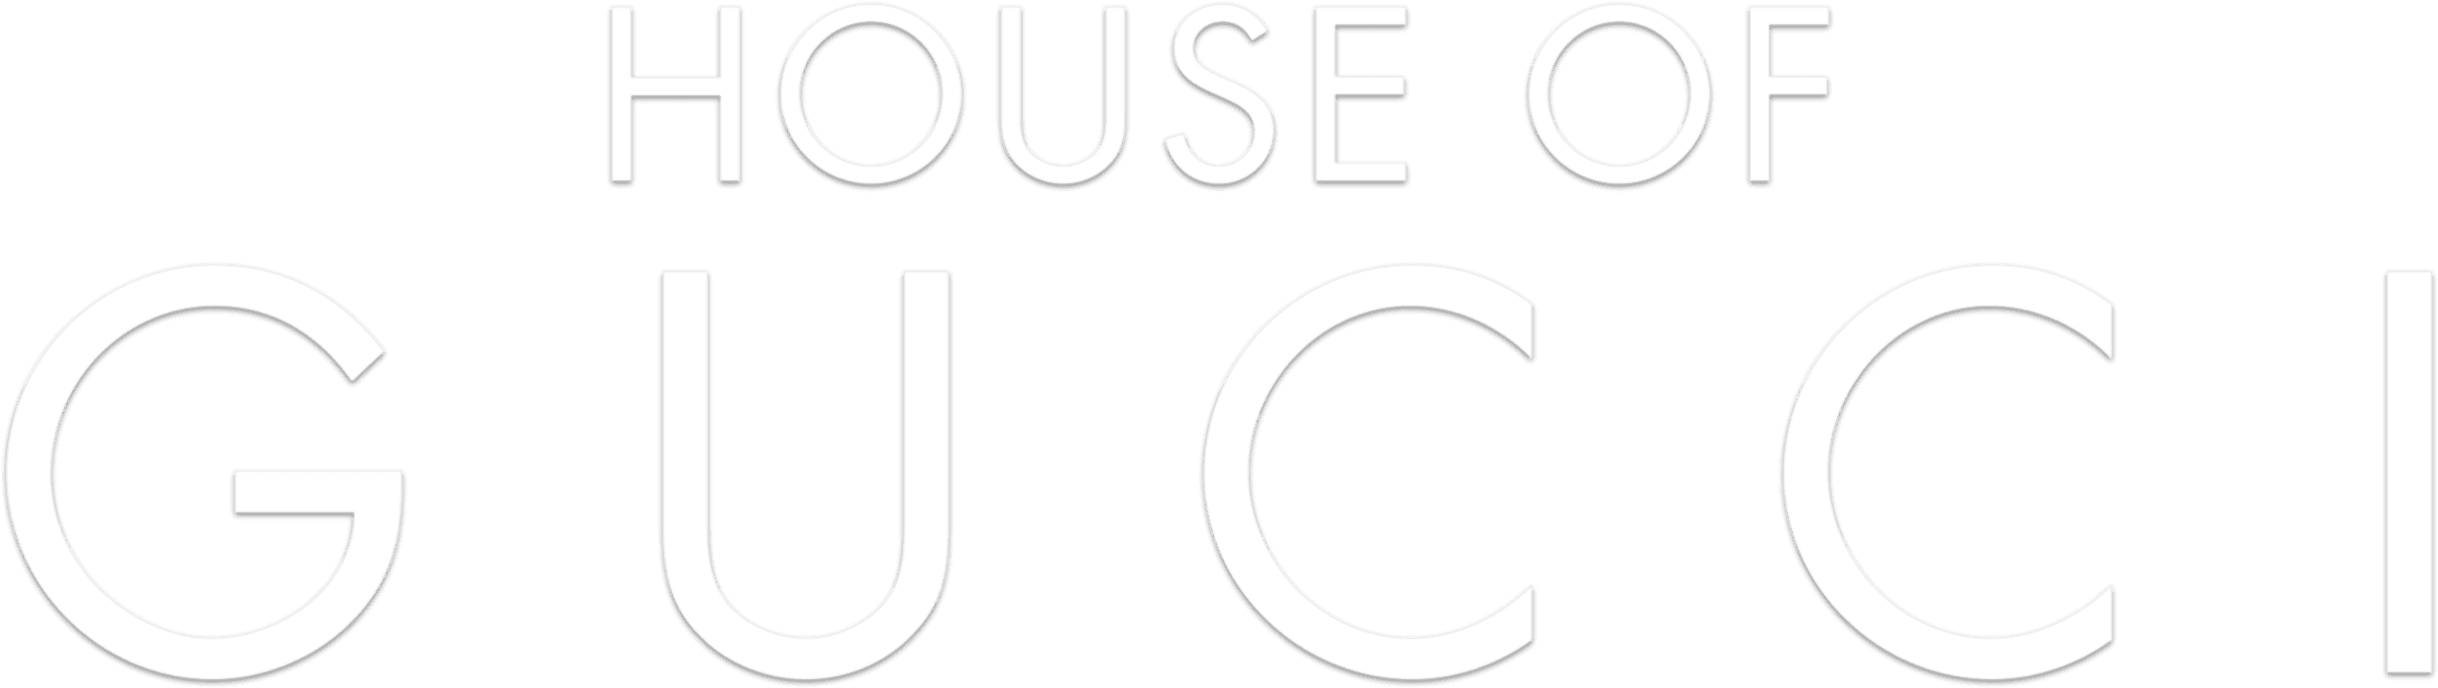 House of Gucci logo